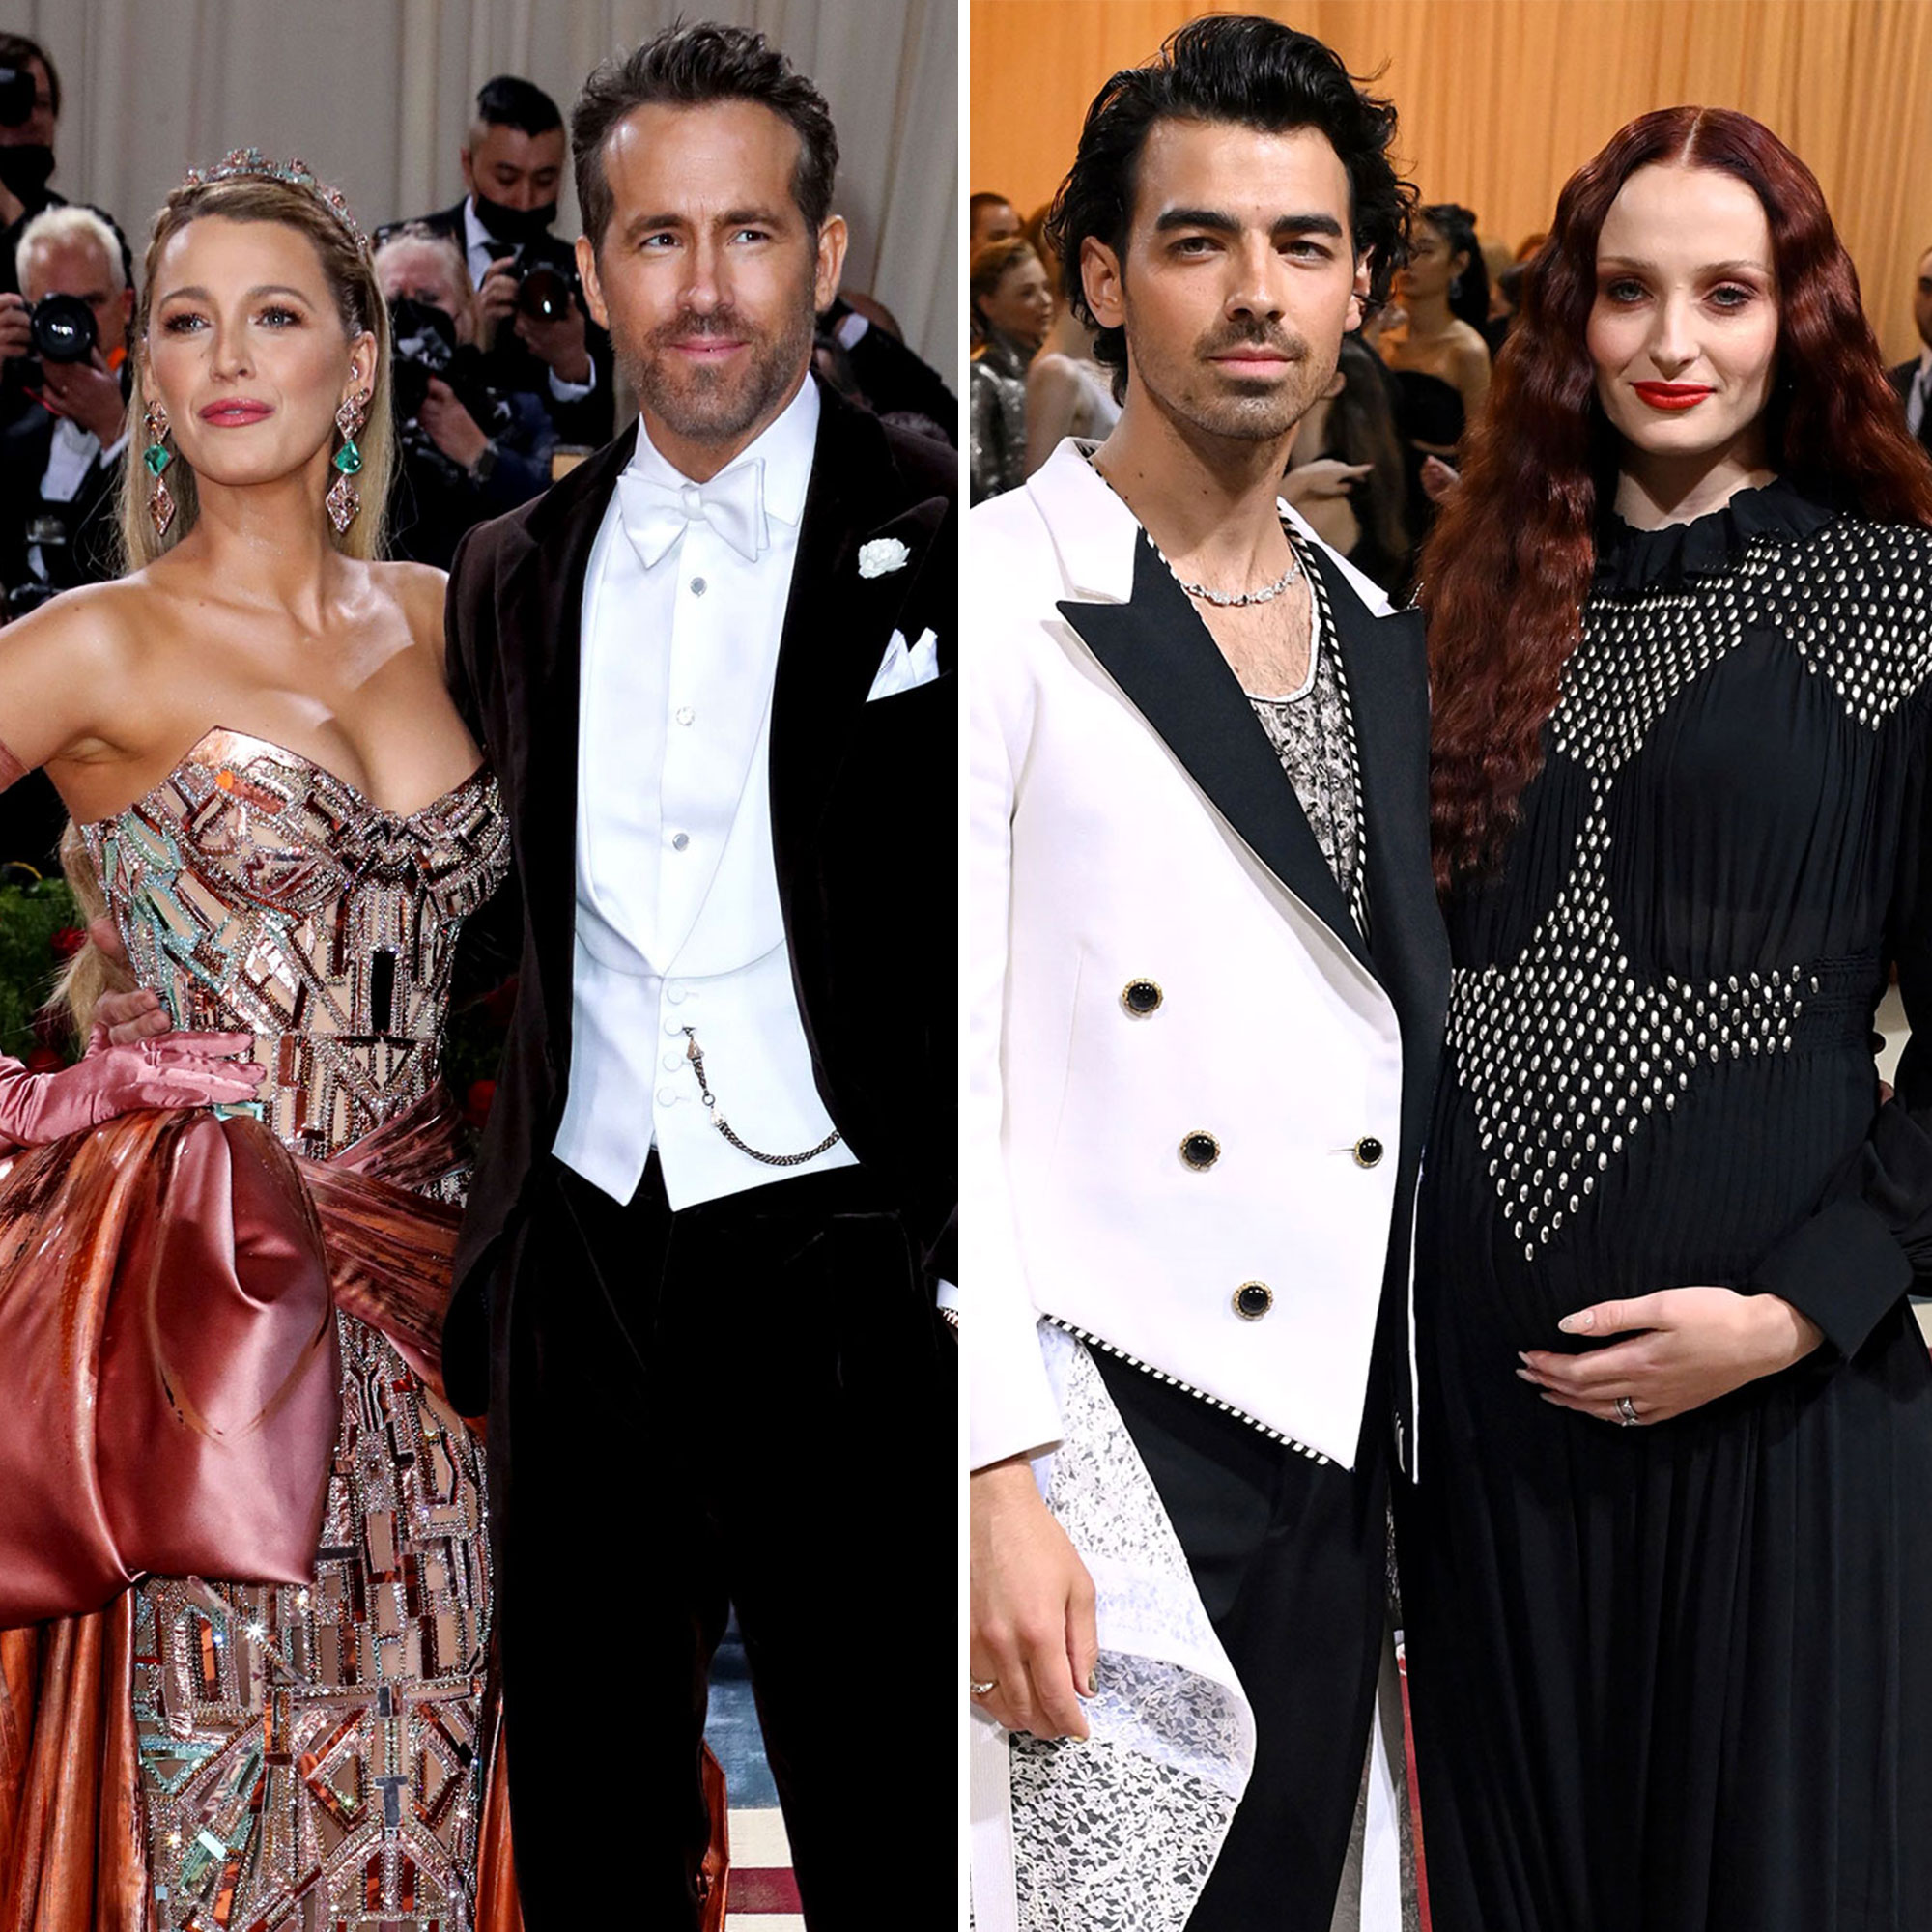 Met Gala 2022: Blake Lively Channeled the Statue of Liberty With Gown